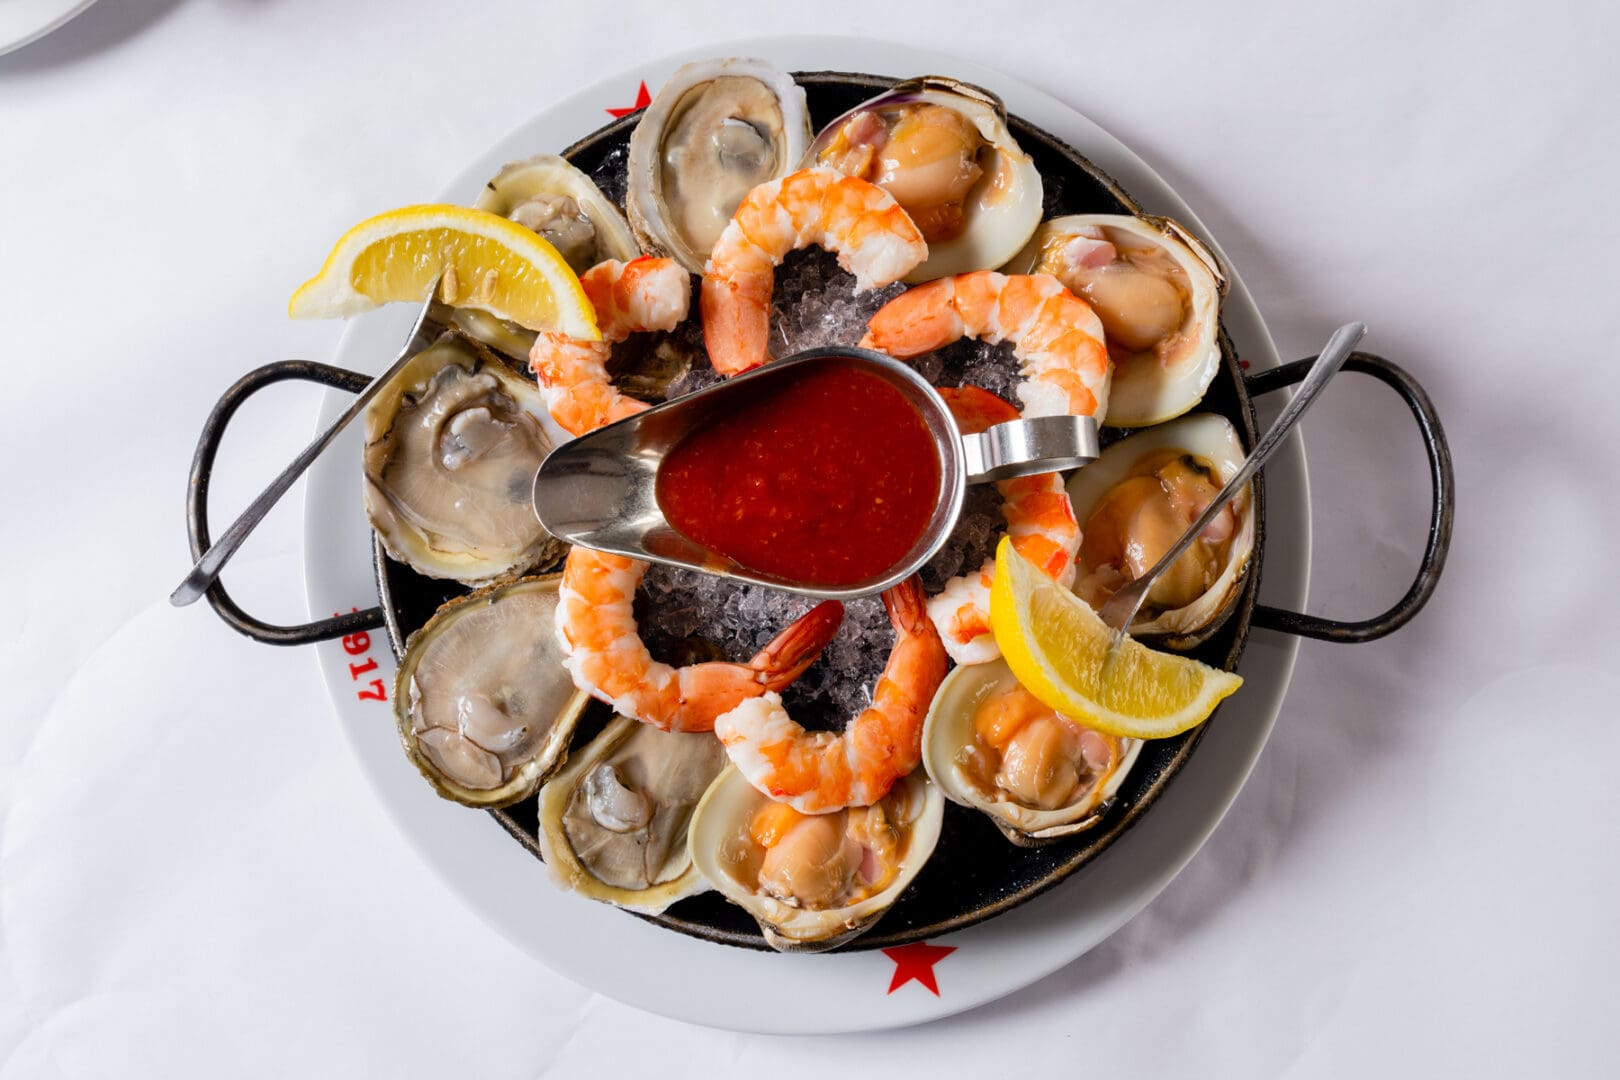 A Platter With Shrimp and Oysters